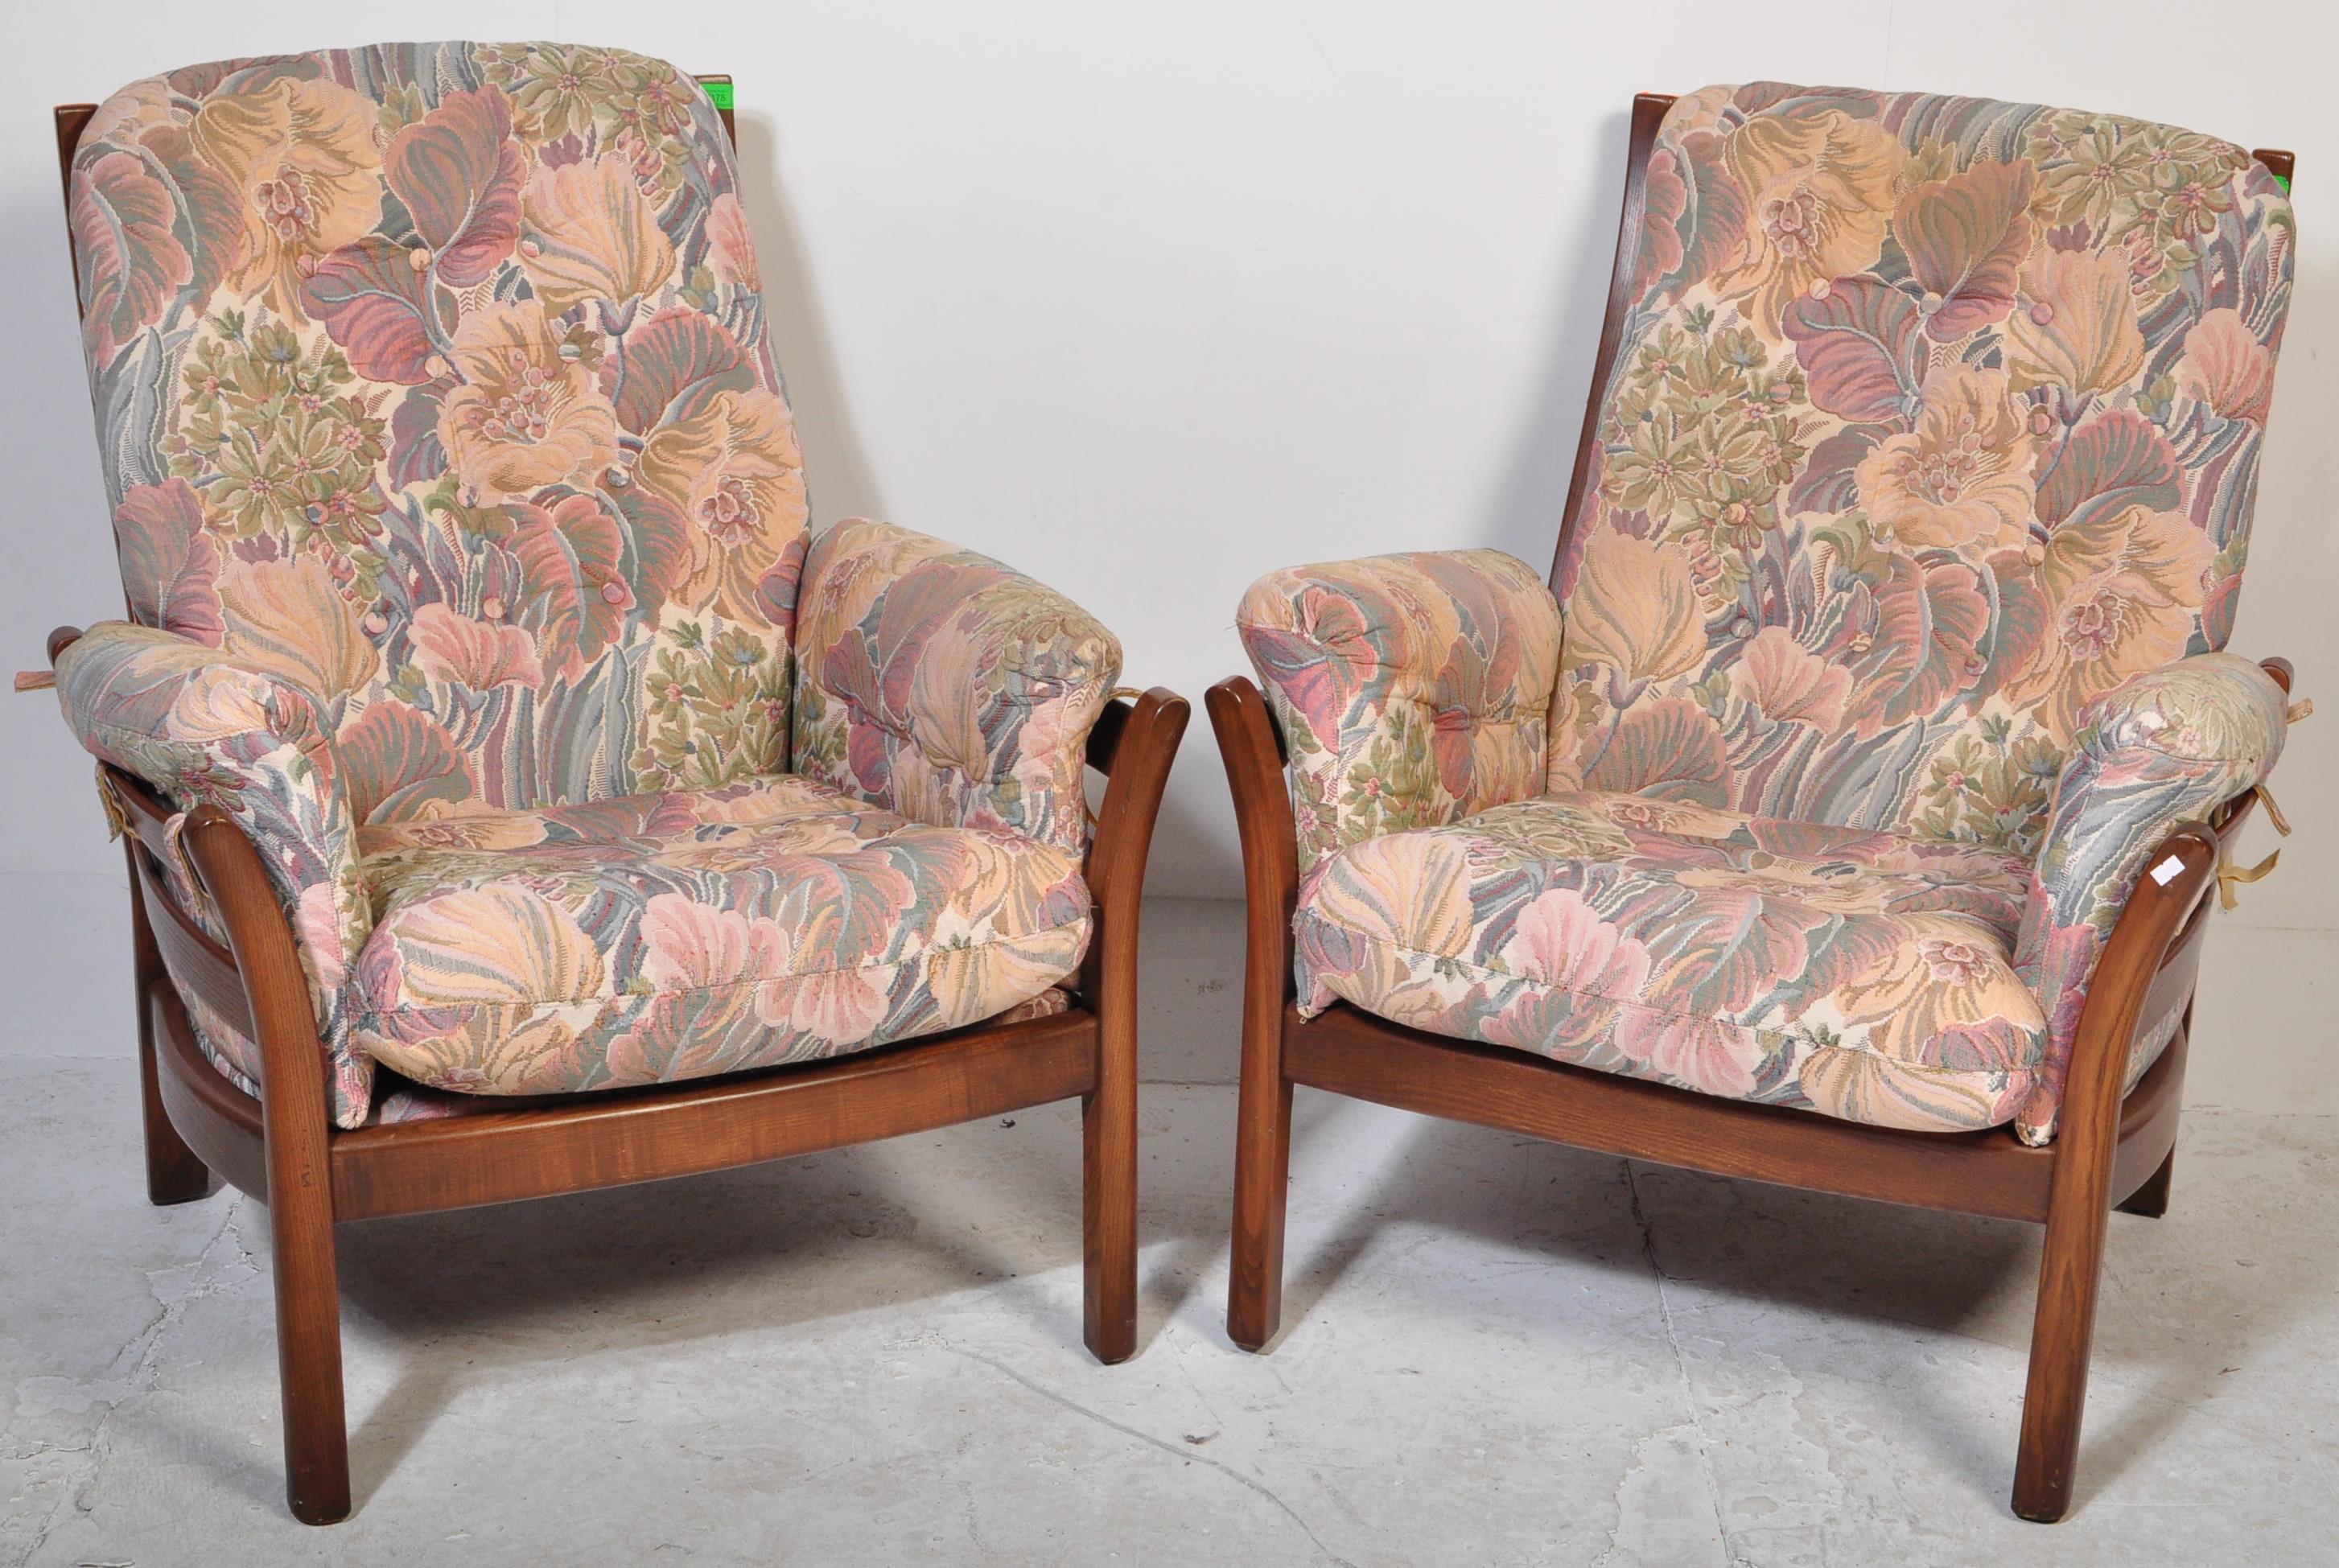 ERCOL RENAISSANCE ARMCHAIRS AND SOFA - THREE PIECE SUITE - Image 4 of 6